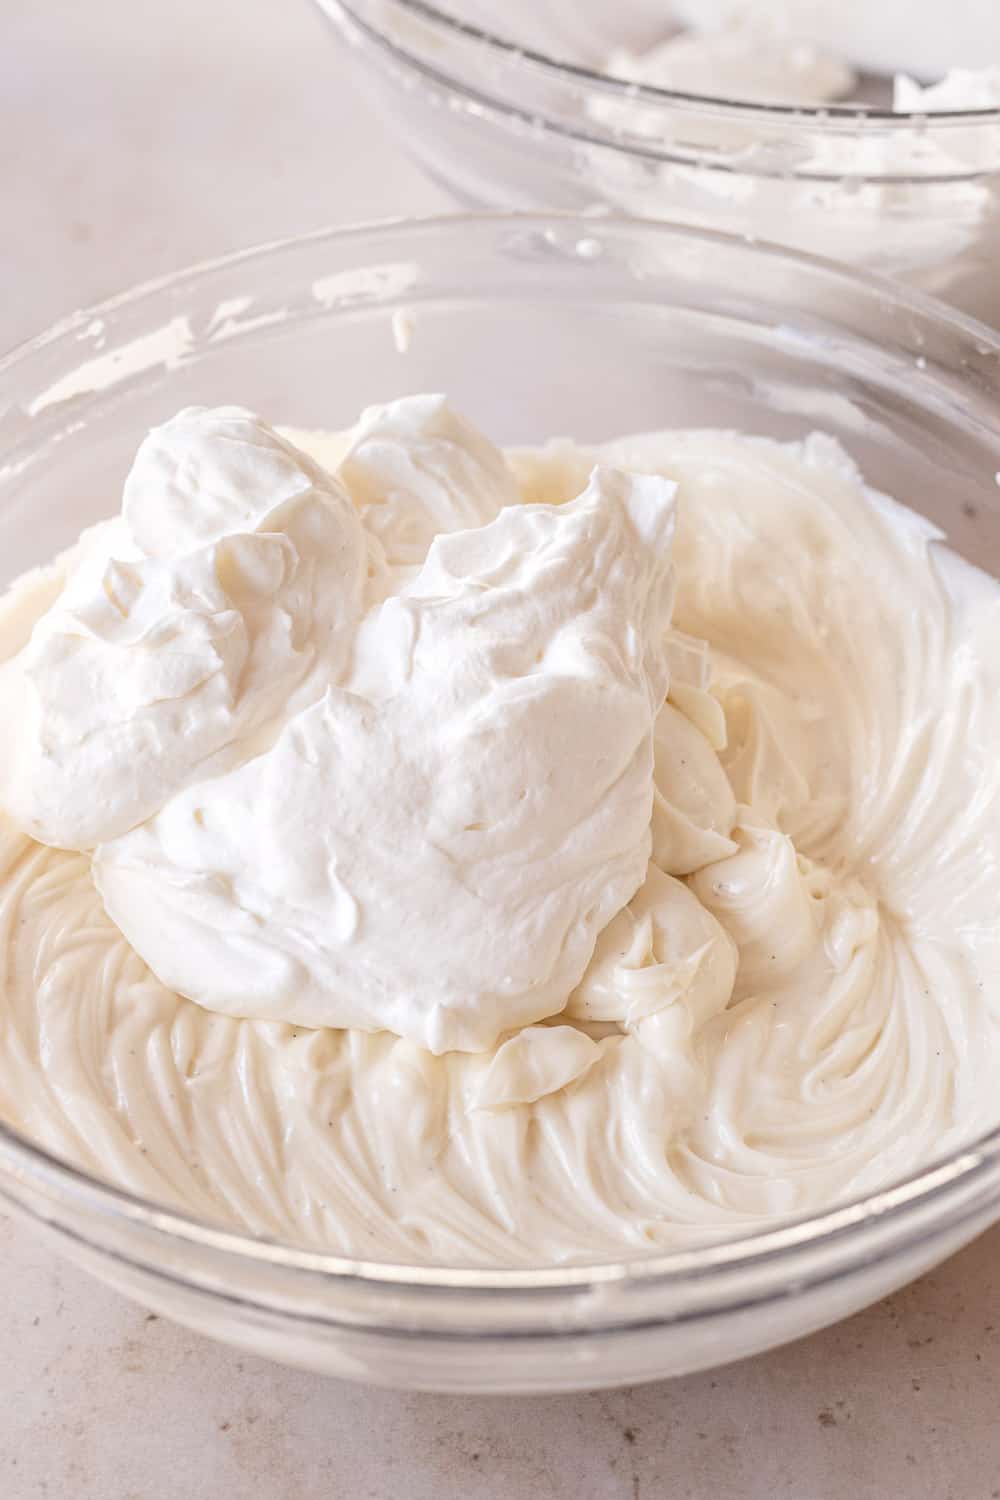 whipped cream in the cream cheese mixture before folding it in